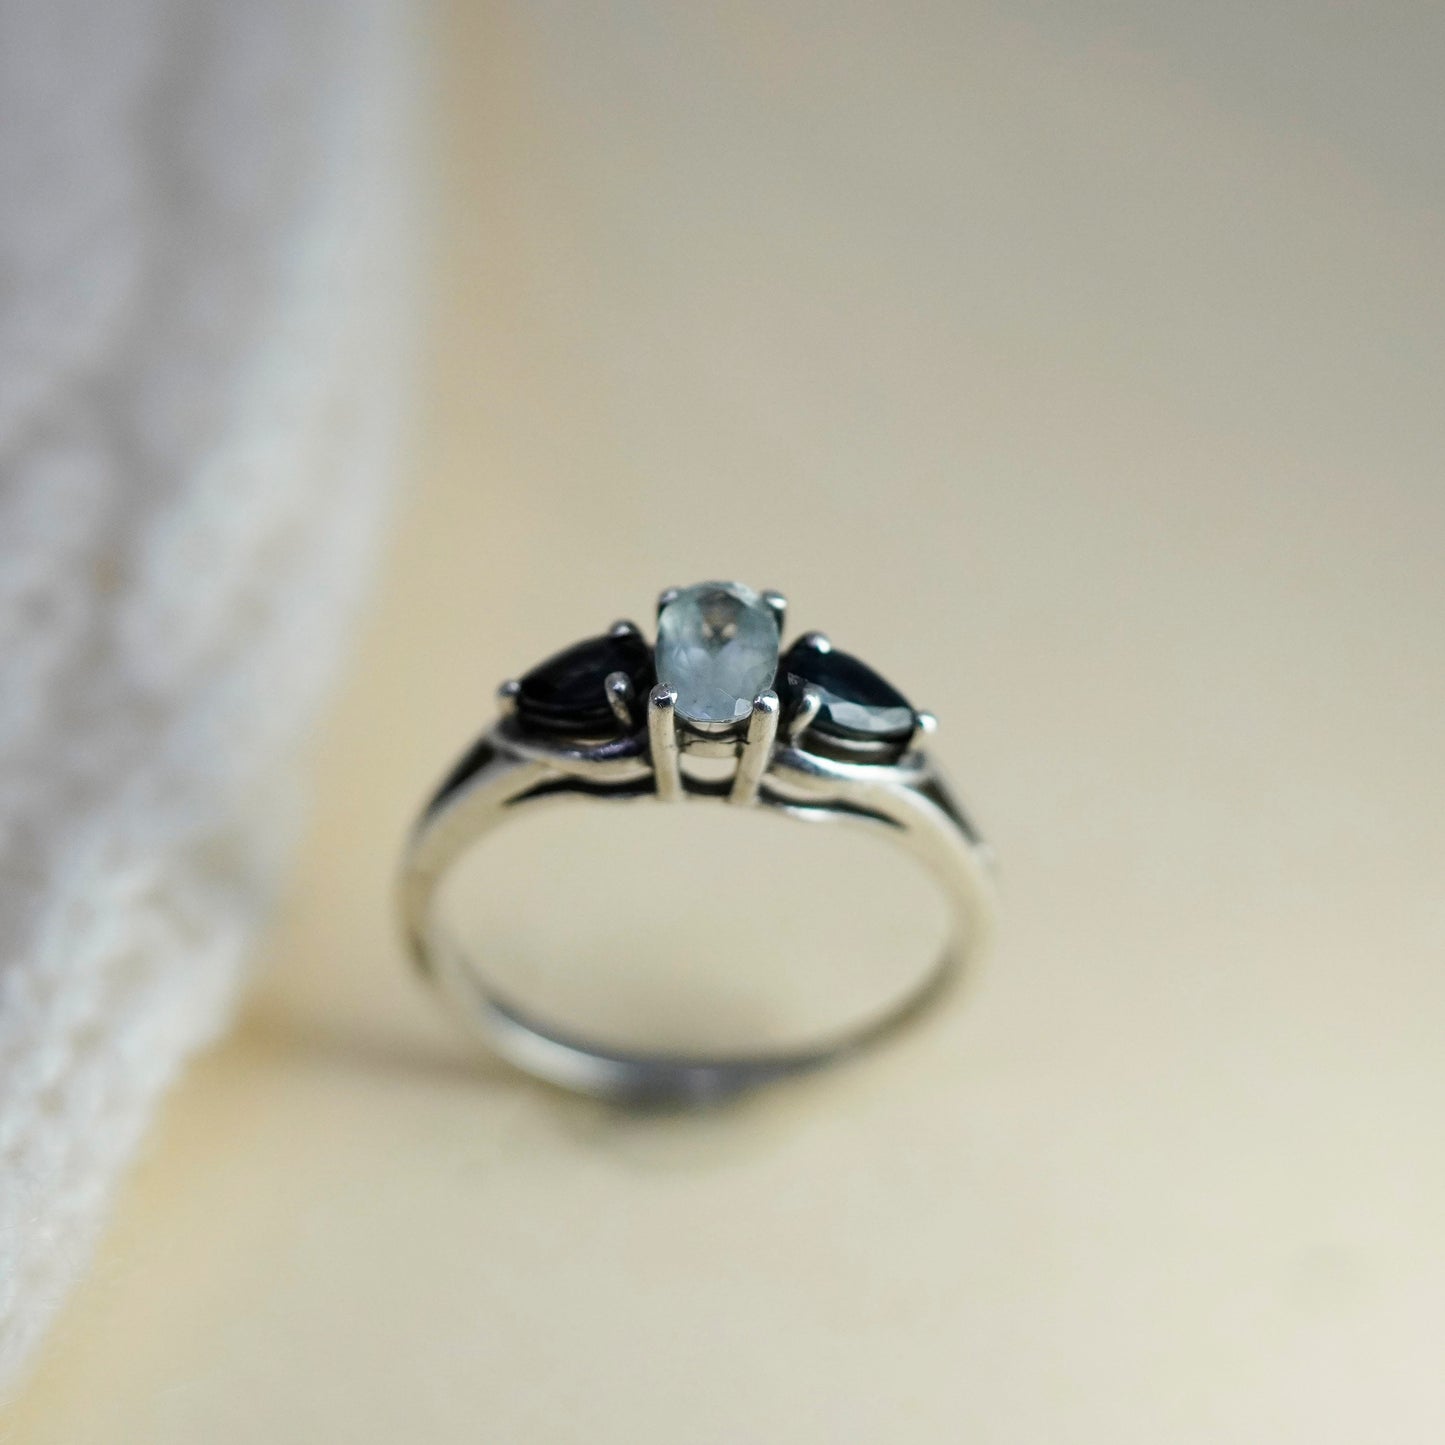 Size 6.75, vintage Sterling 925 silver engagement ring with crystal sapphire